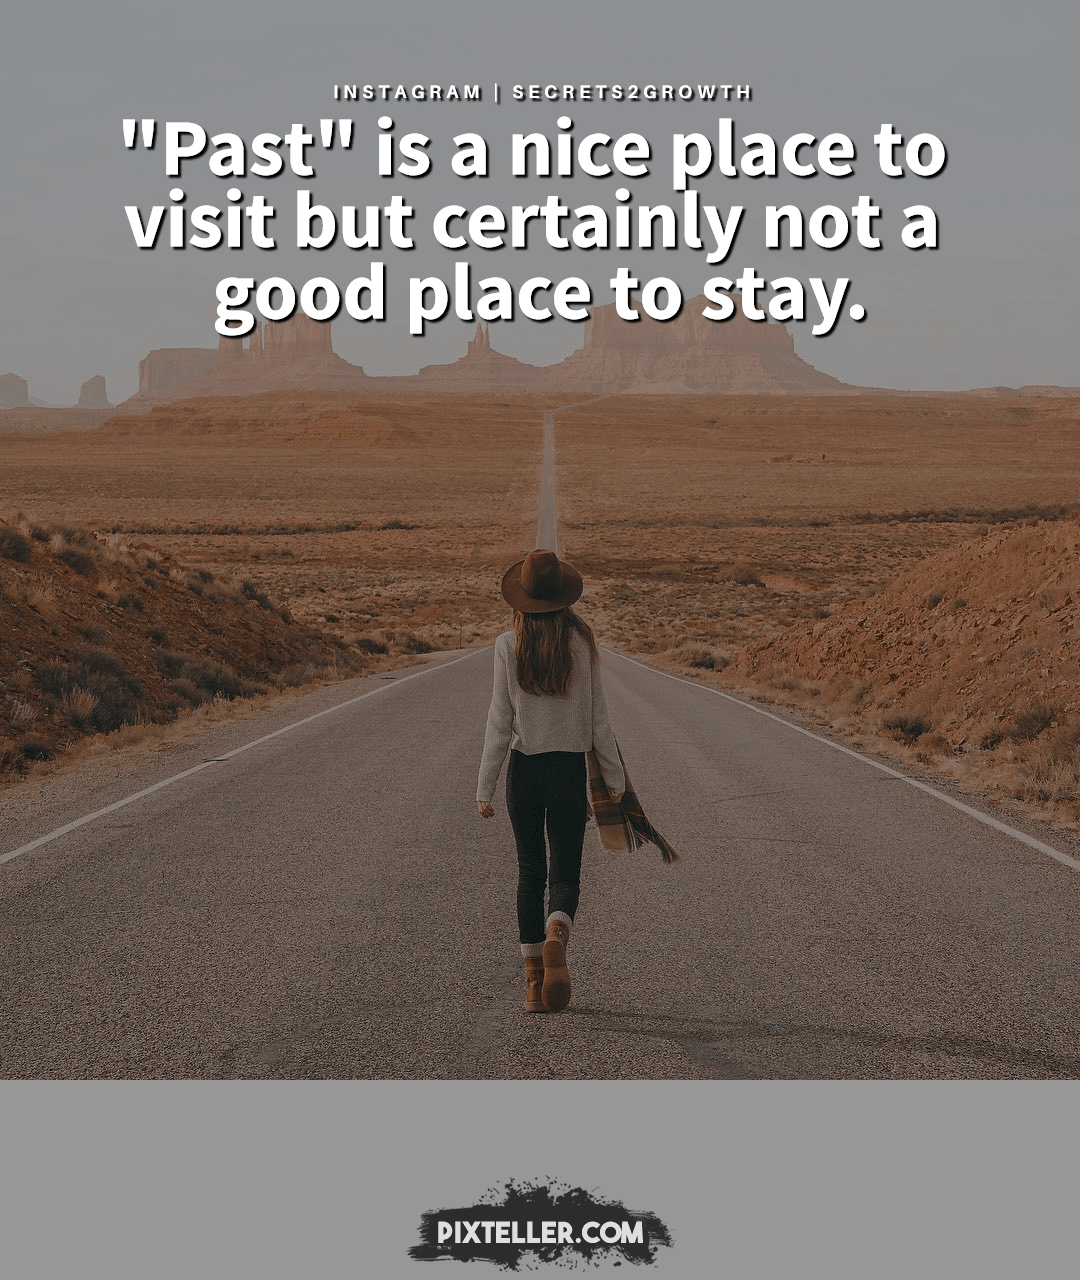 "Past" is a nice place to visit but Design 